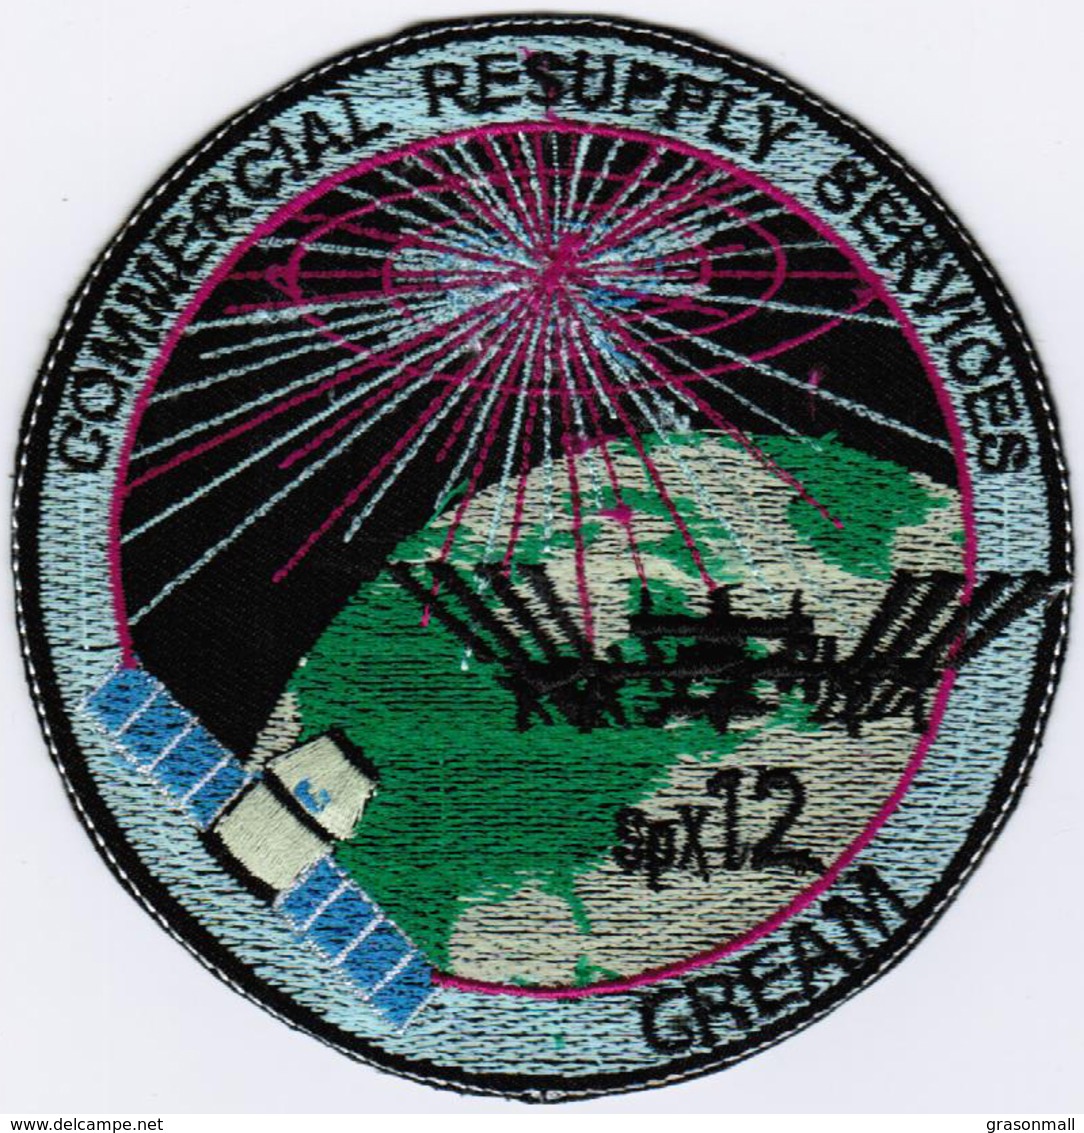 ISS Expedition 52 Dragon SPX-12 NASA International Space Station Badge Iron On Embroidered Patch - Patches